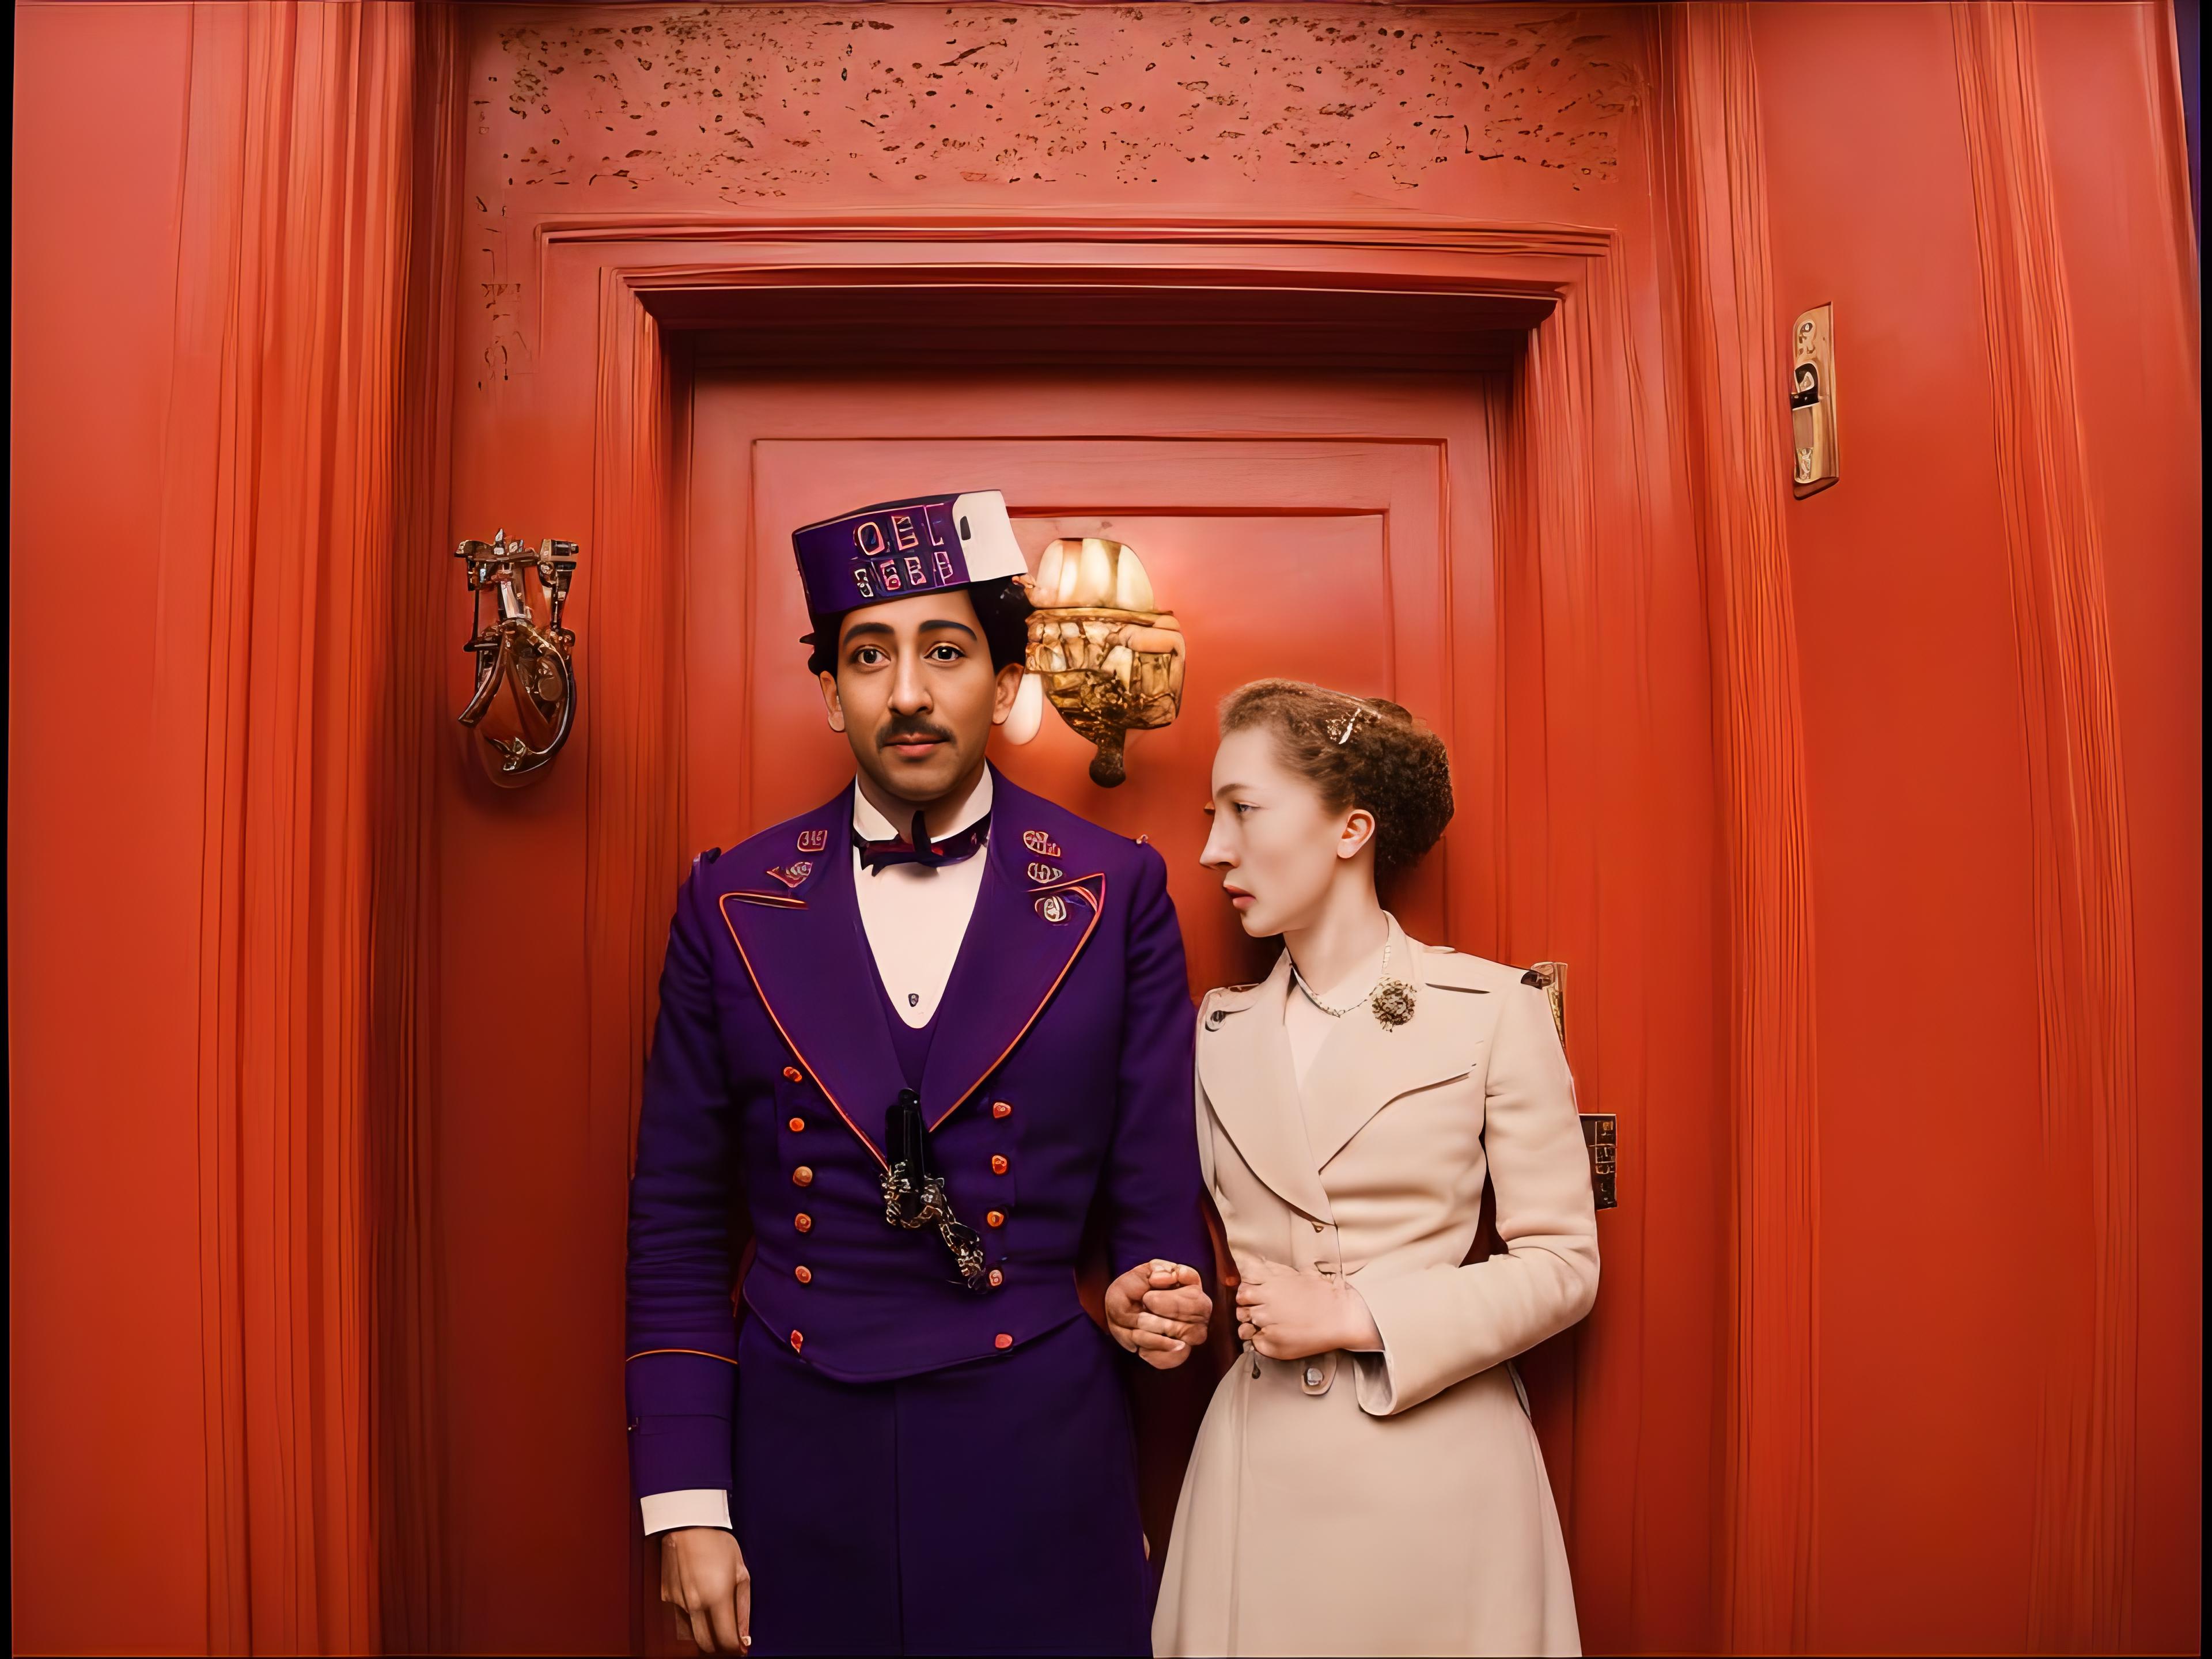 The Grand Budapest Hotel image by dalecell